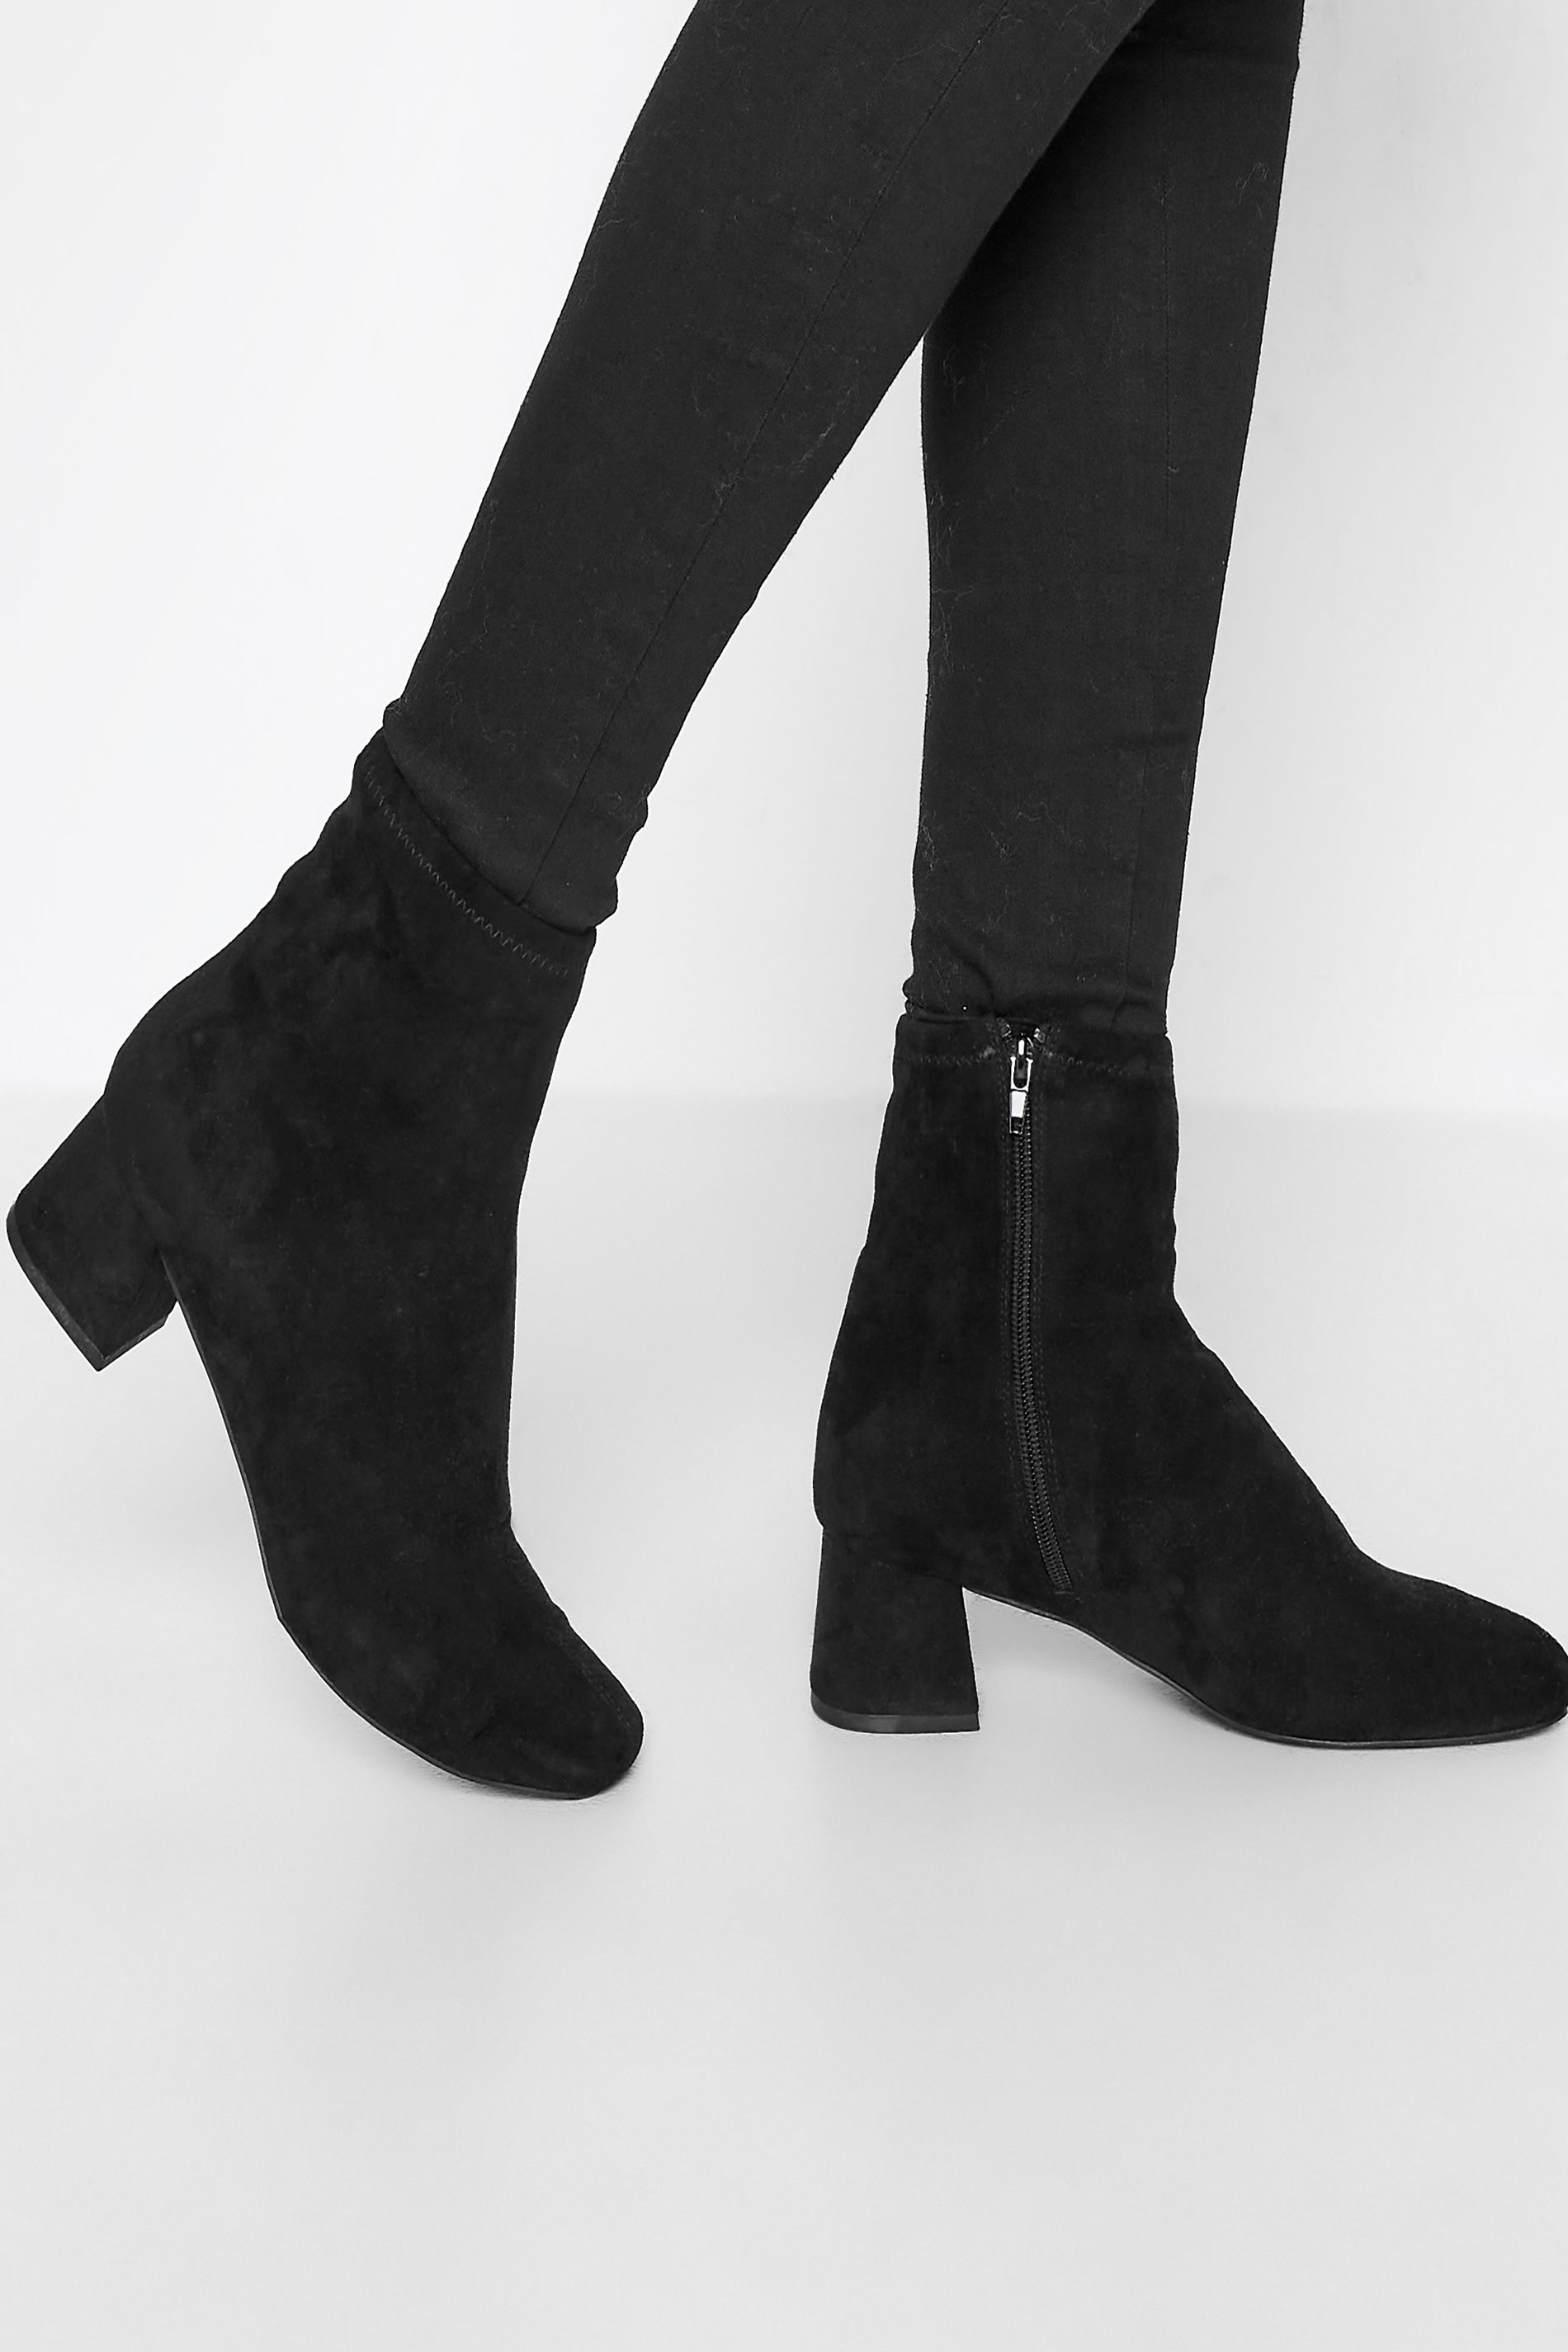 LTS Black Suede Block Heel Boots In Standard D Fit | Long Tall Sally 1